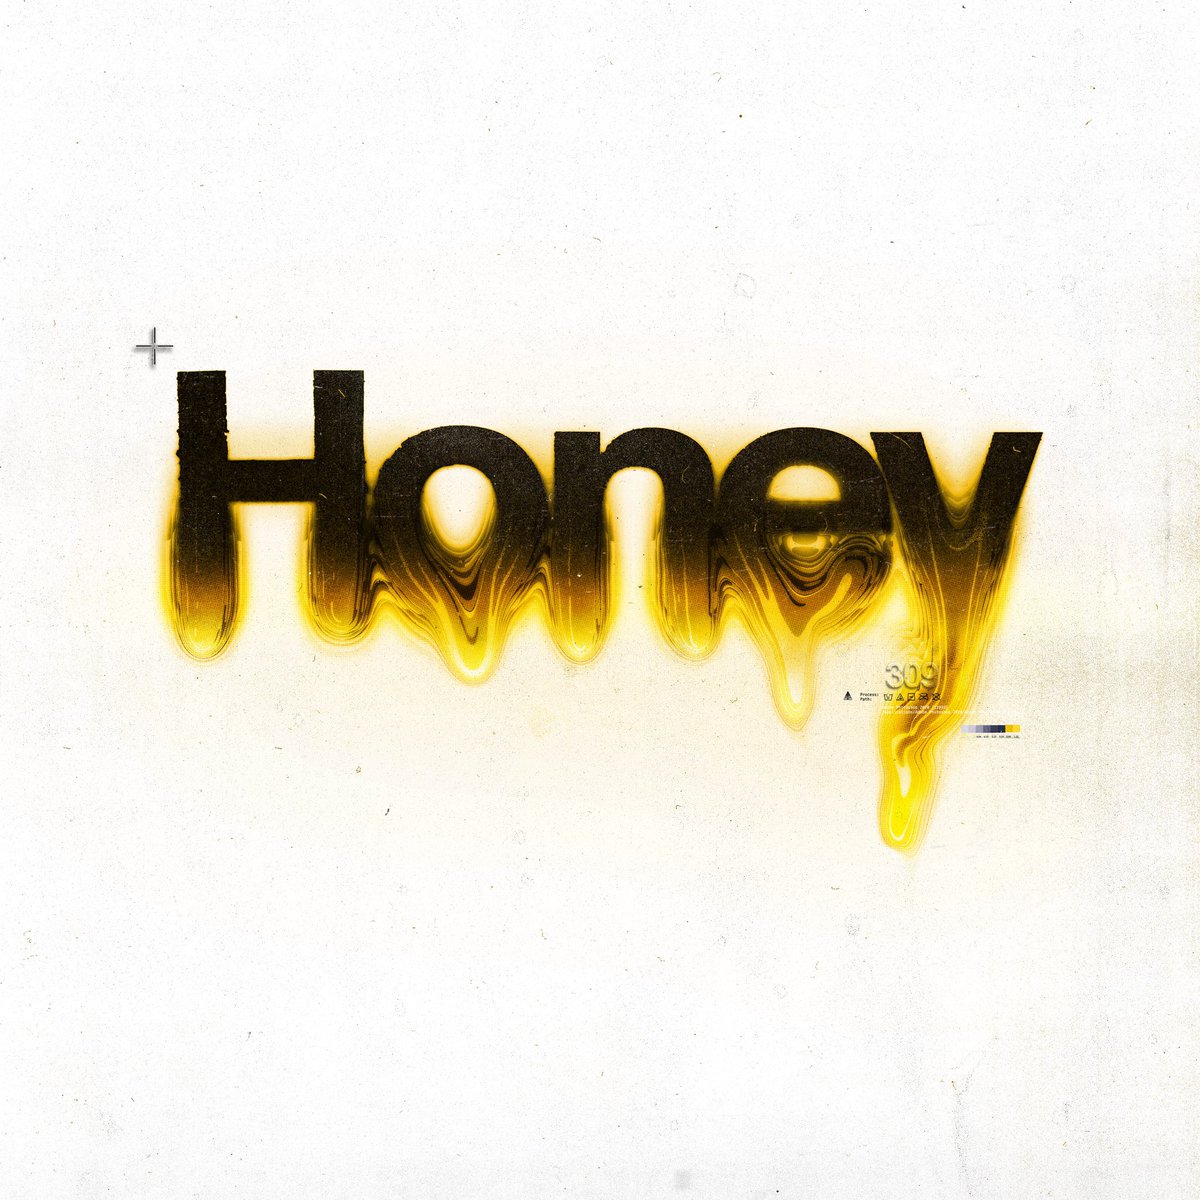 Bailey 🍌 On Twitter Rt Visual Dreamzz 🍯sweet Like Honey Made Using Only Photoshop